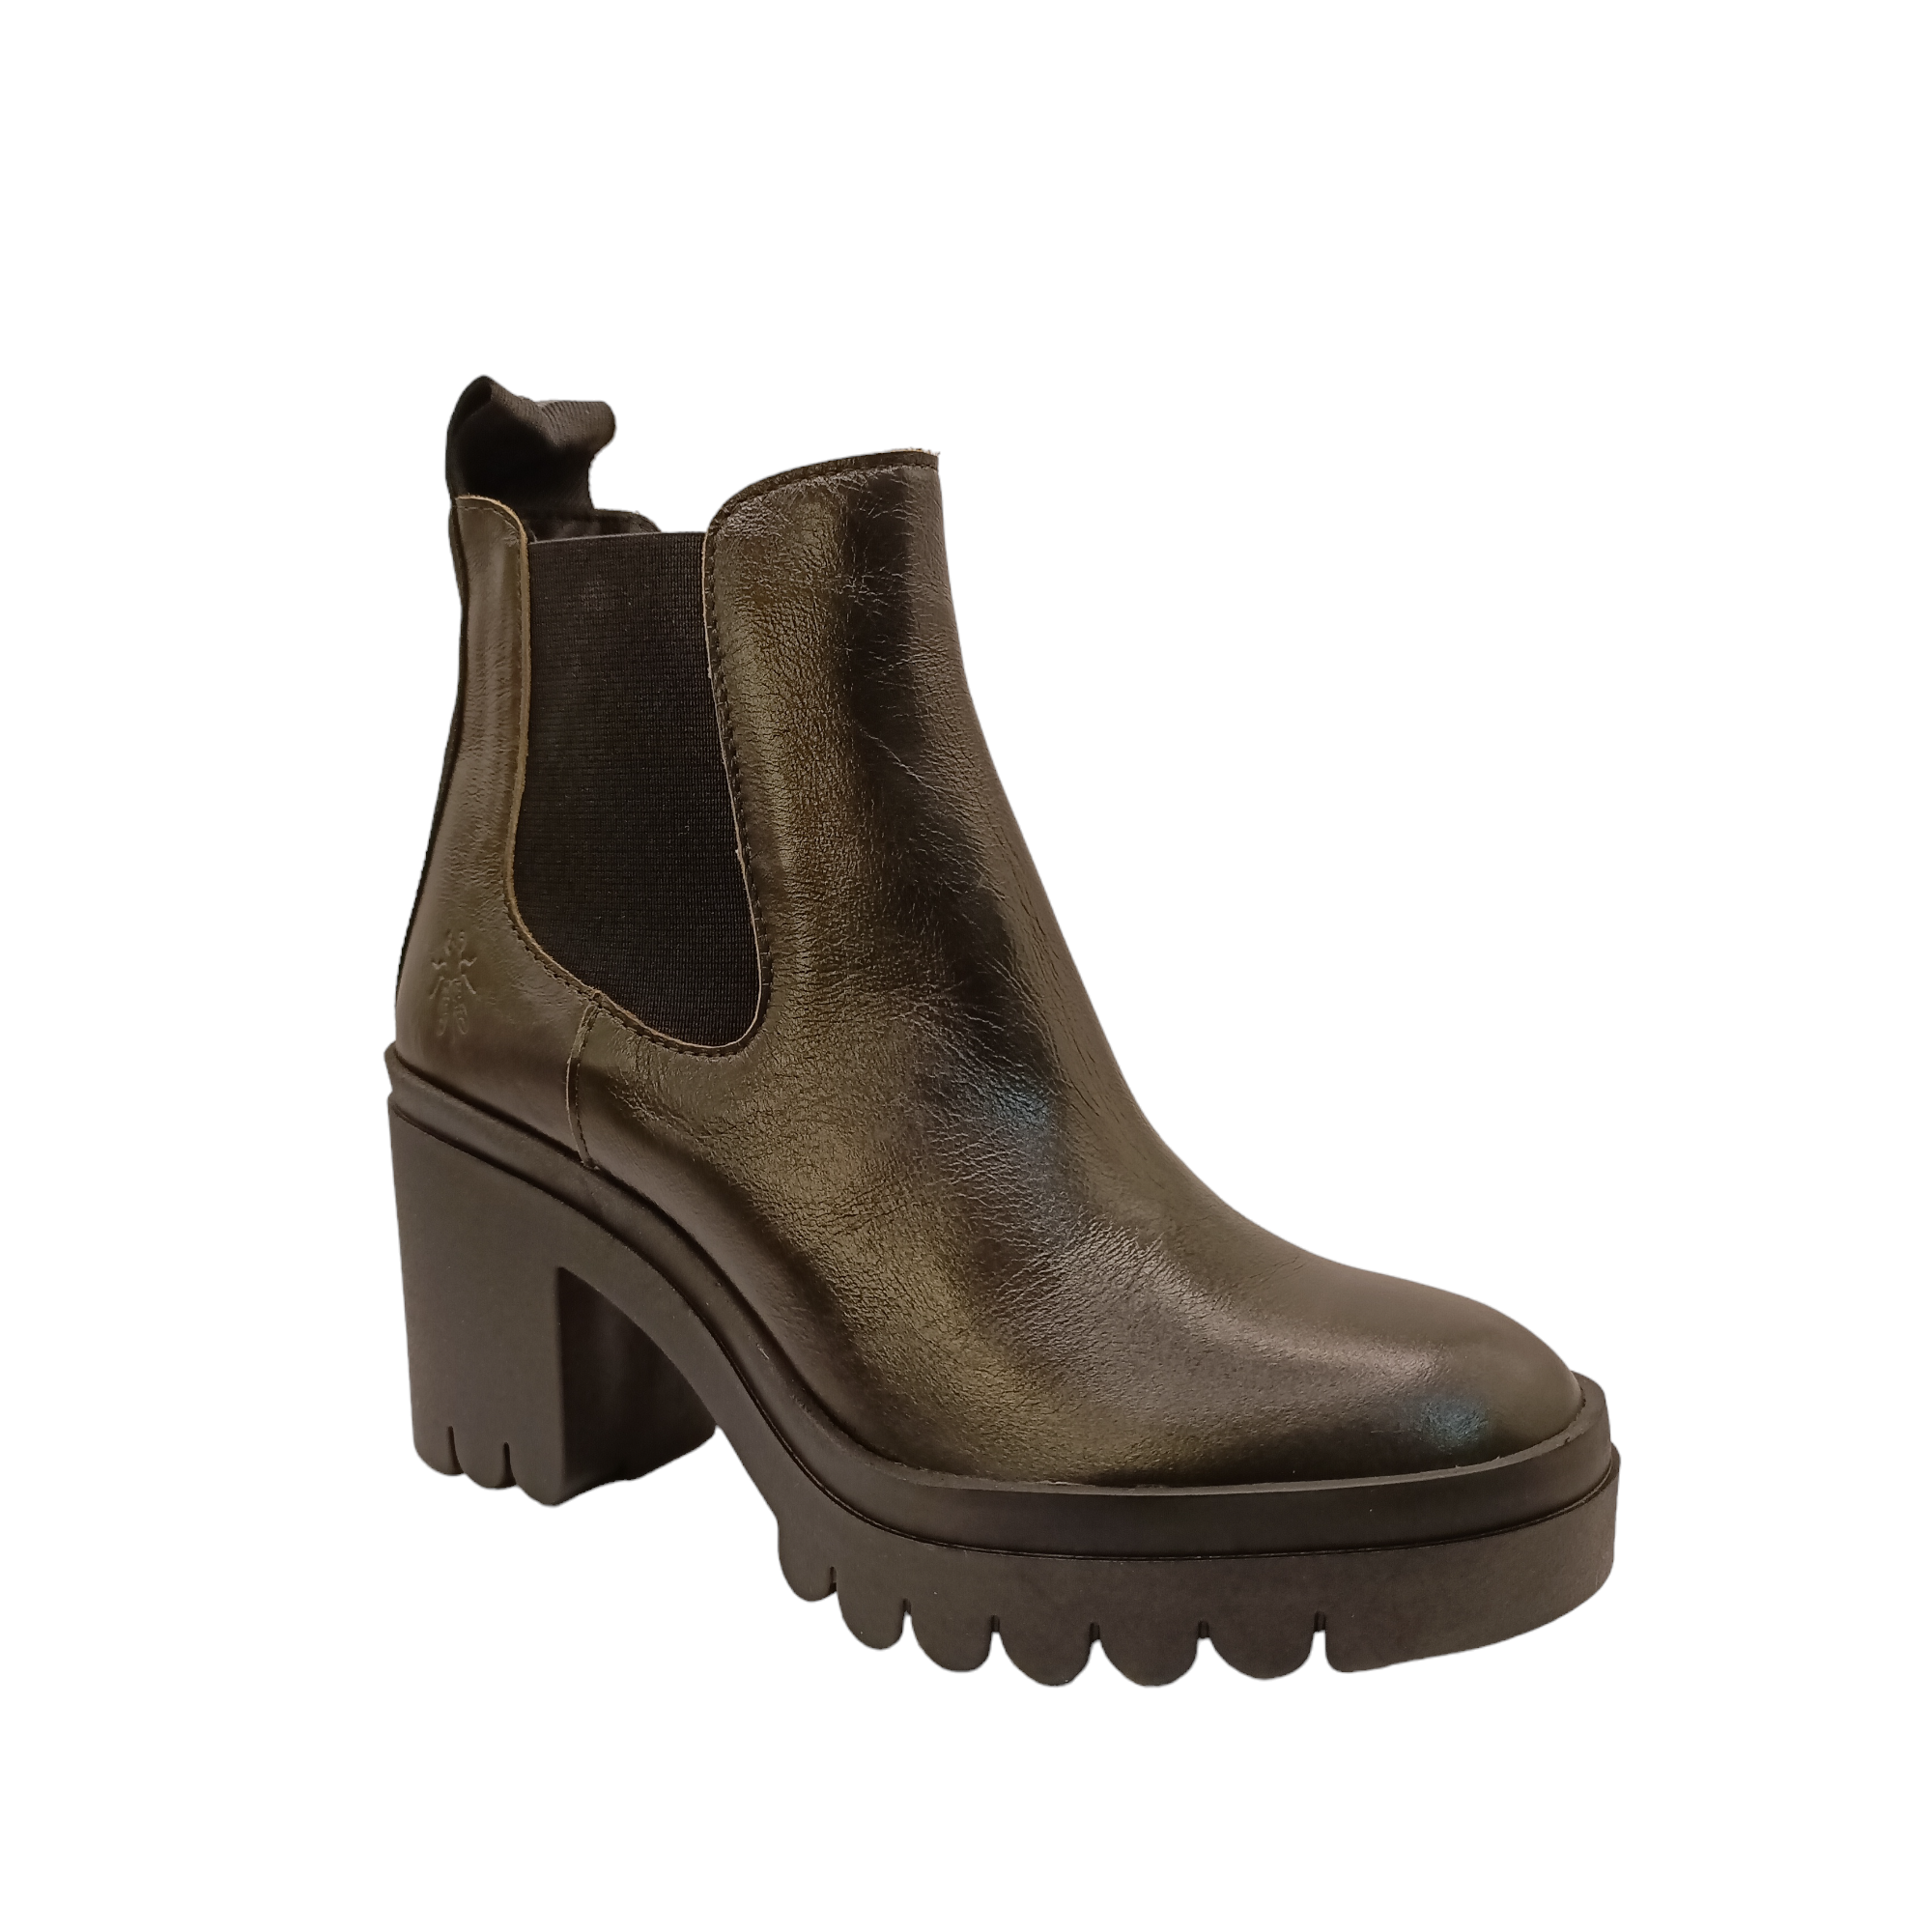 Shop Tope Fly London - with shoe&me - from Fly London - General - Boot, Winter, Womens - [collection]